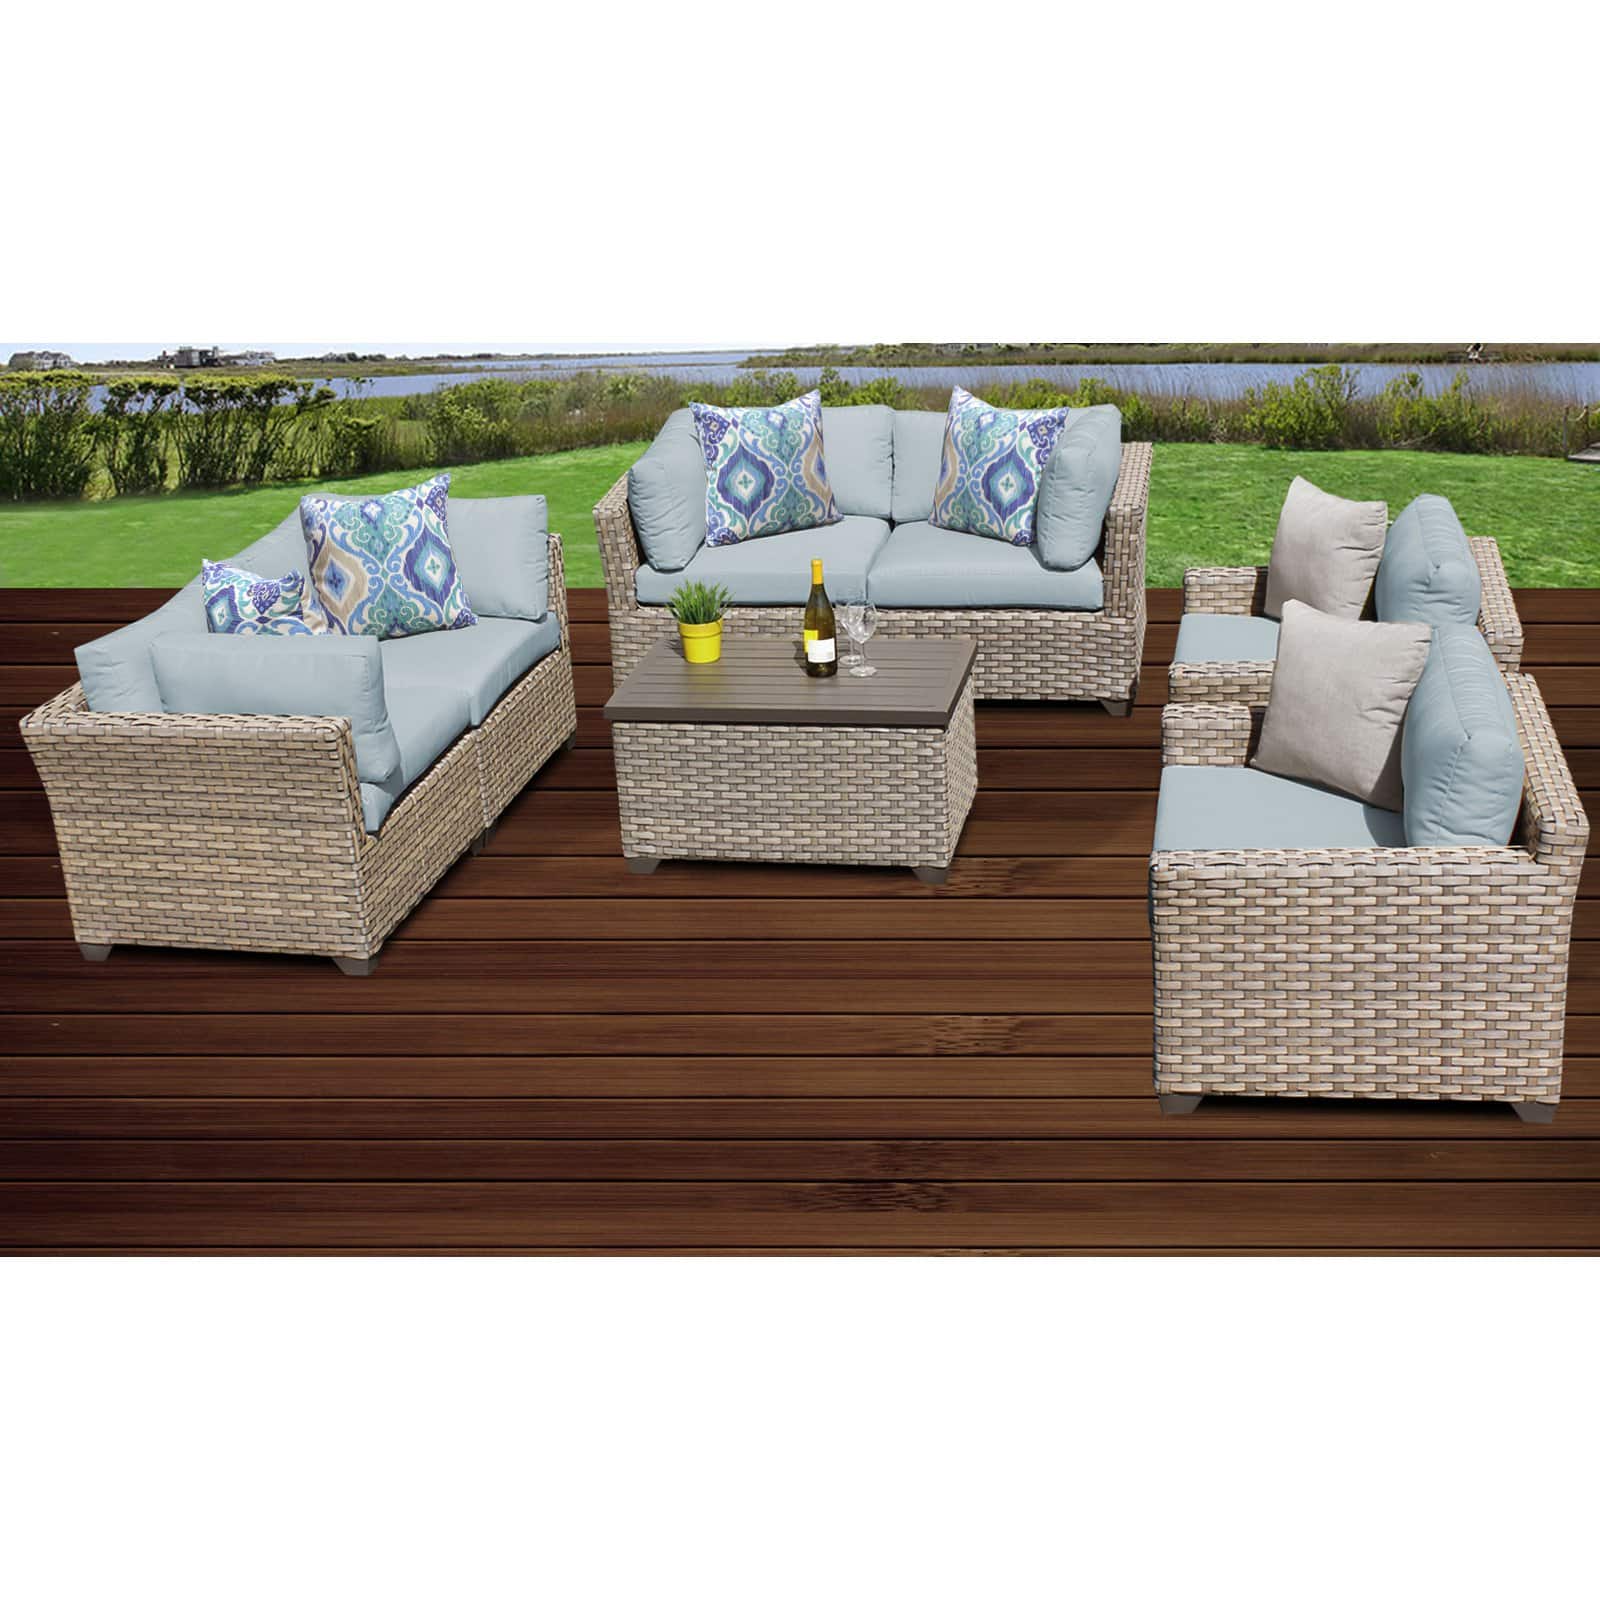 TK Classics Monterey Wicker 7 Piece Patio Conversation Set with Club Chair and 2 Sets of Cushion Covers - image 4 of 5